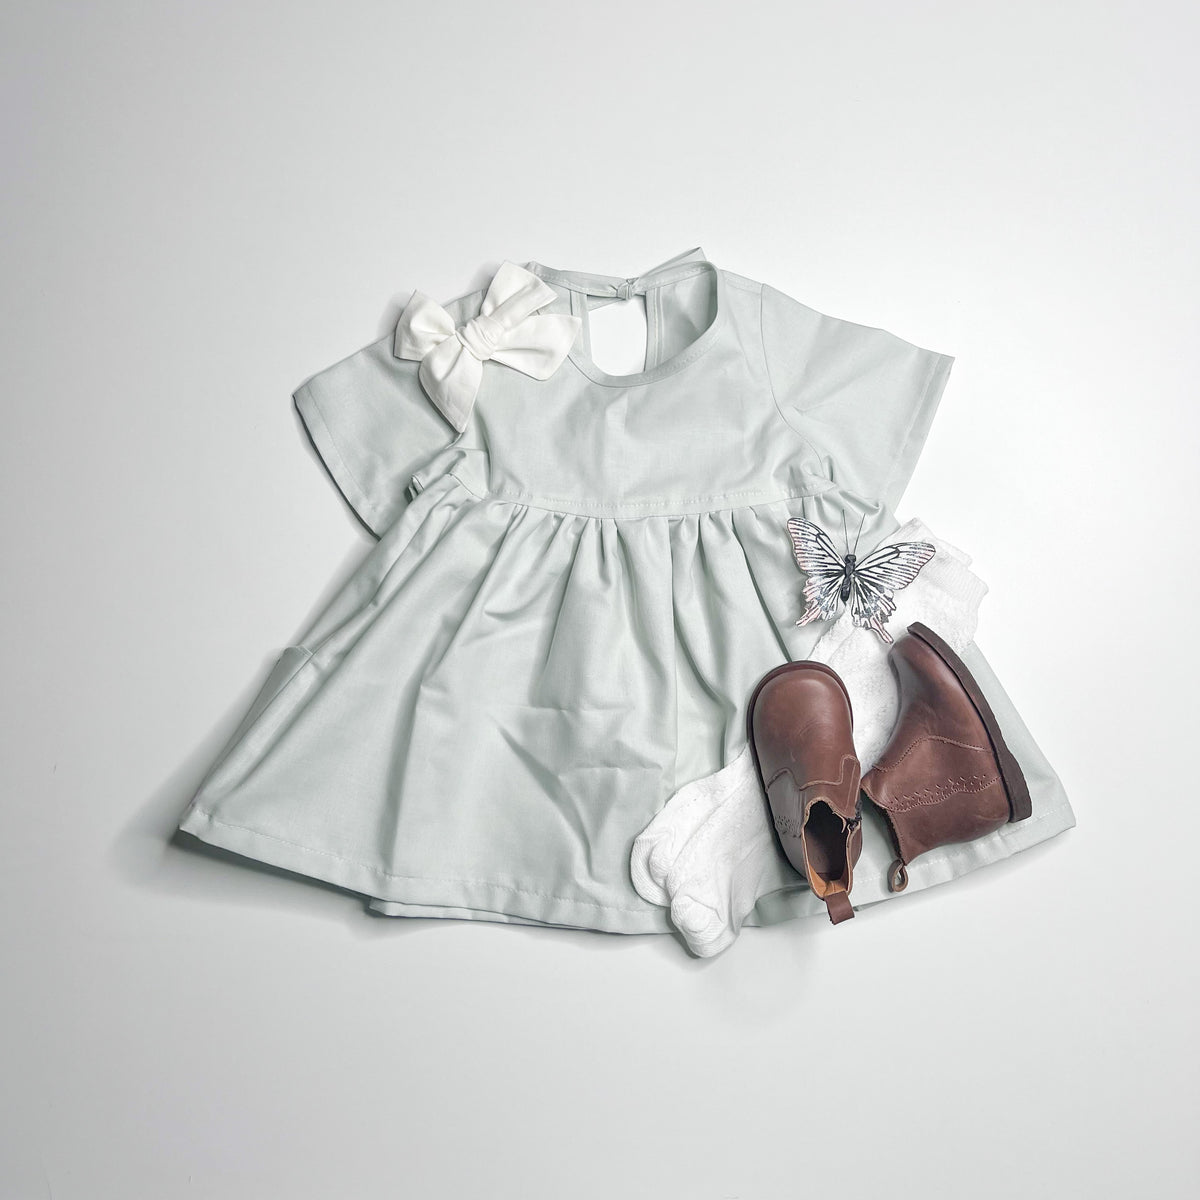 Nora Short-Sleeved Tunic with Pockets in 'Rainwater - Ready To Ship